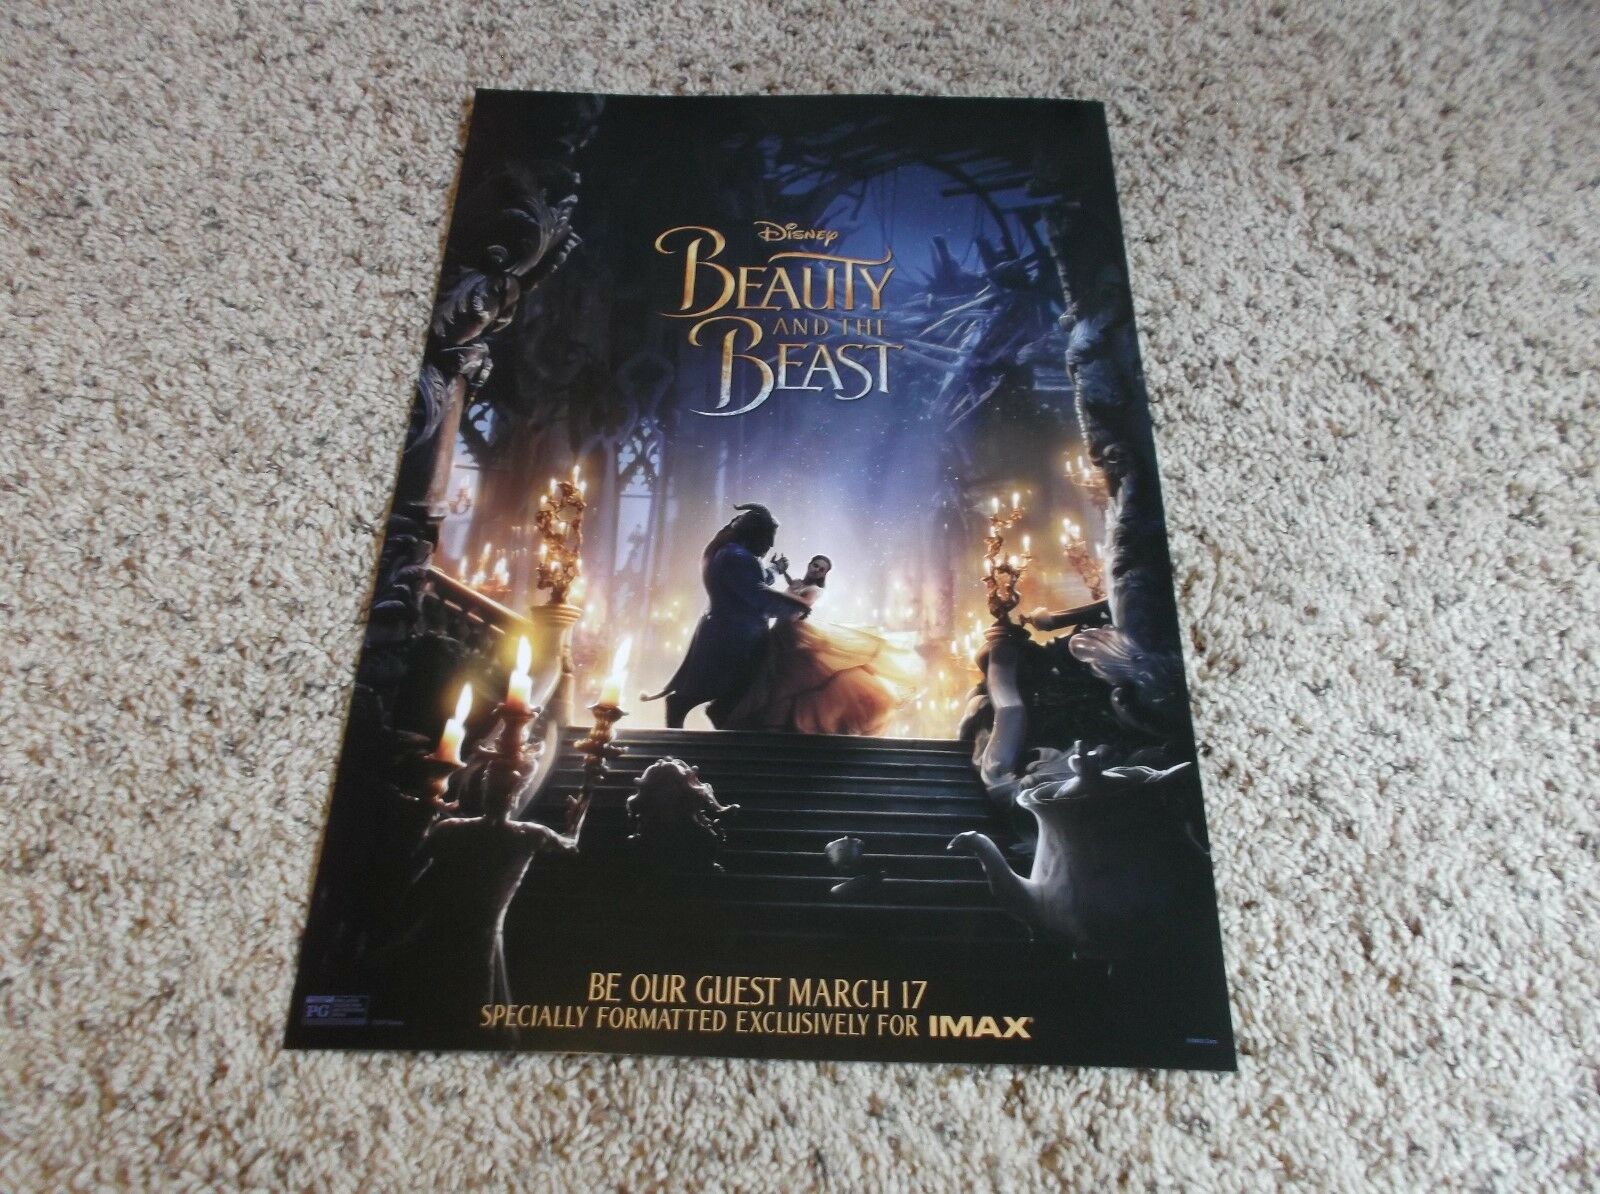 Beauty And The Beast 2017 Original S/s 13" X 19" Imax Movie Promo Poster